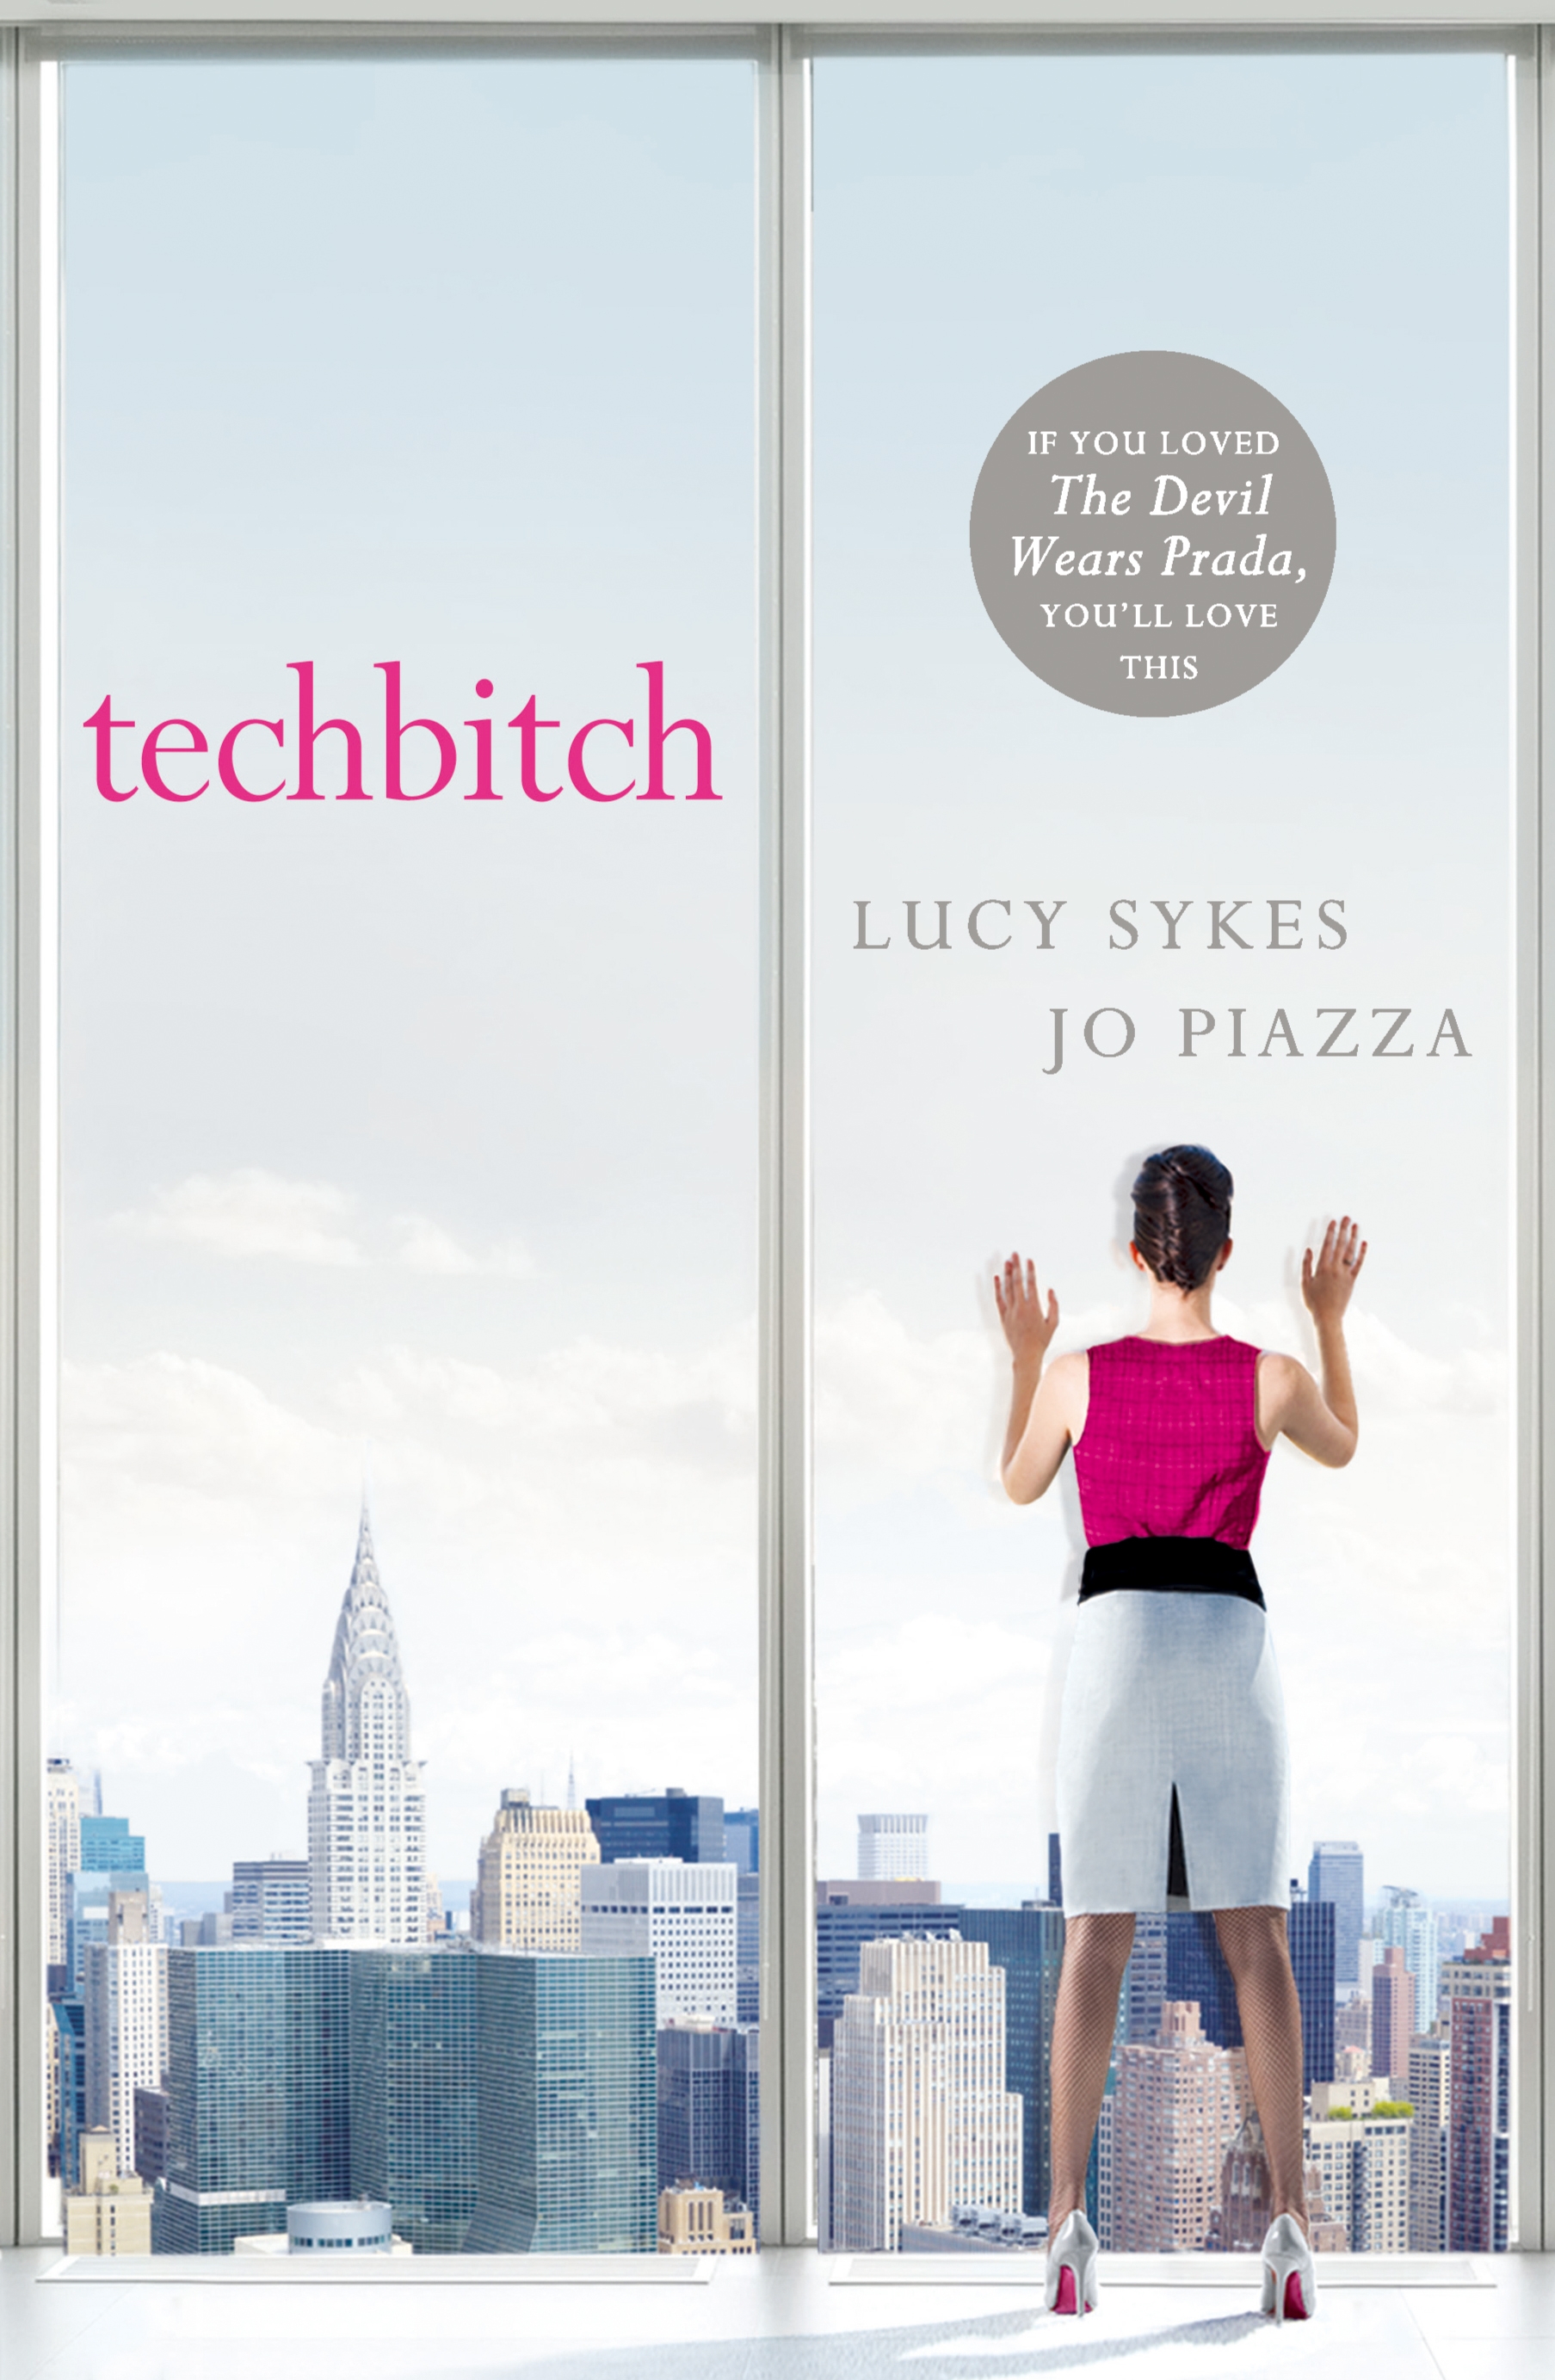 Techbitch (aka The Knockoff) by Lucy Sykes and Jo Piazza